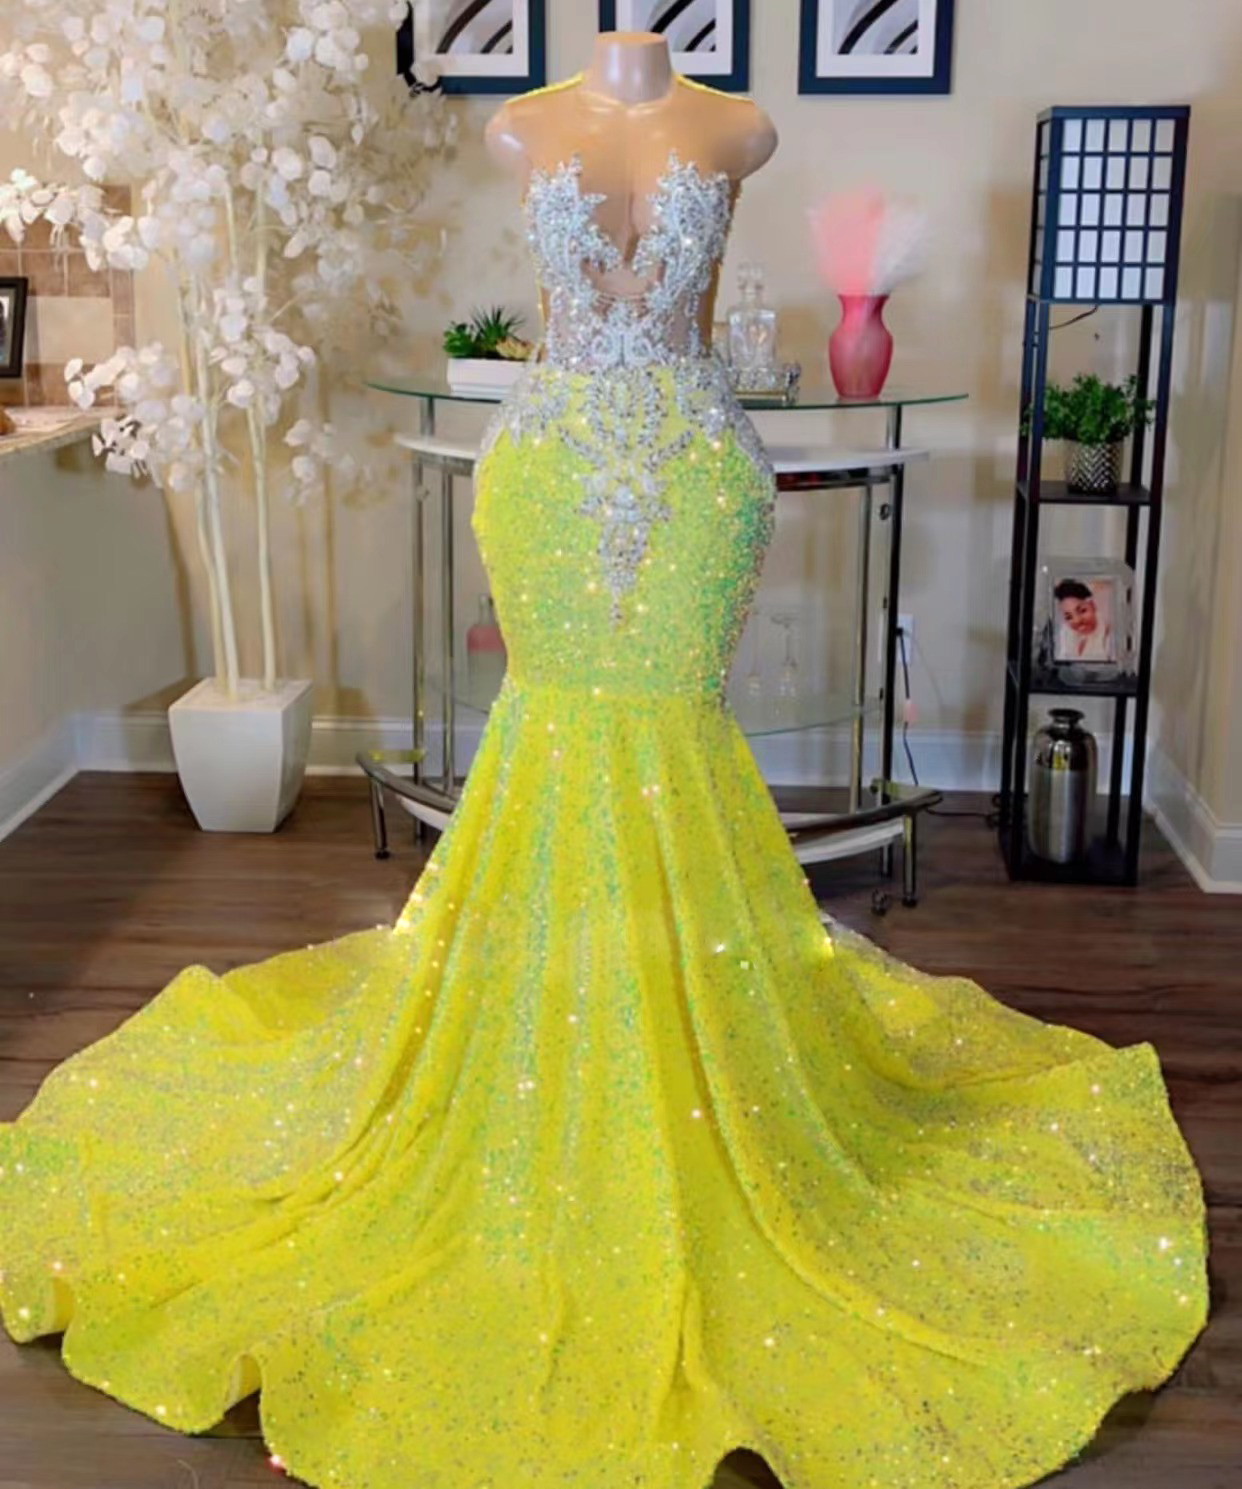 Yellow Prom Dresses, O Neck Prom Dress, Sparkly Prom Dresses, Beaded Applique Prom Dresses, Mermaid Prom Dresses, Prom Dresses For Black Girl,